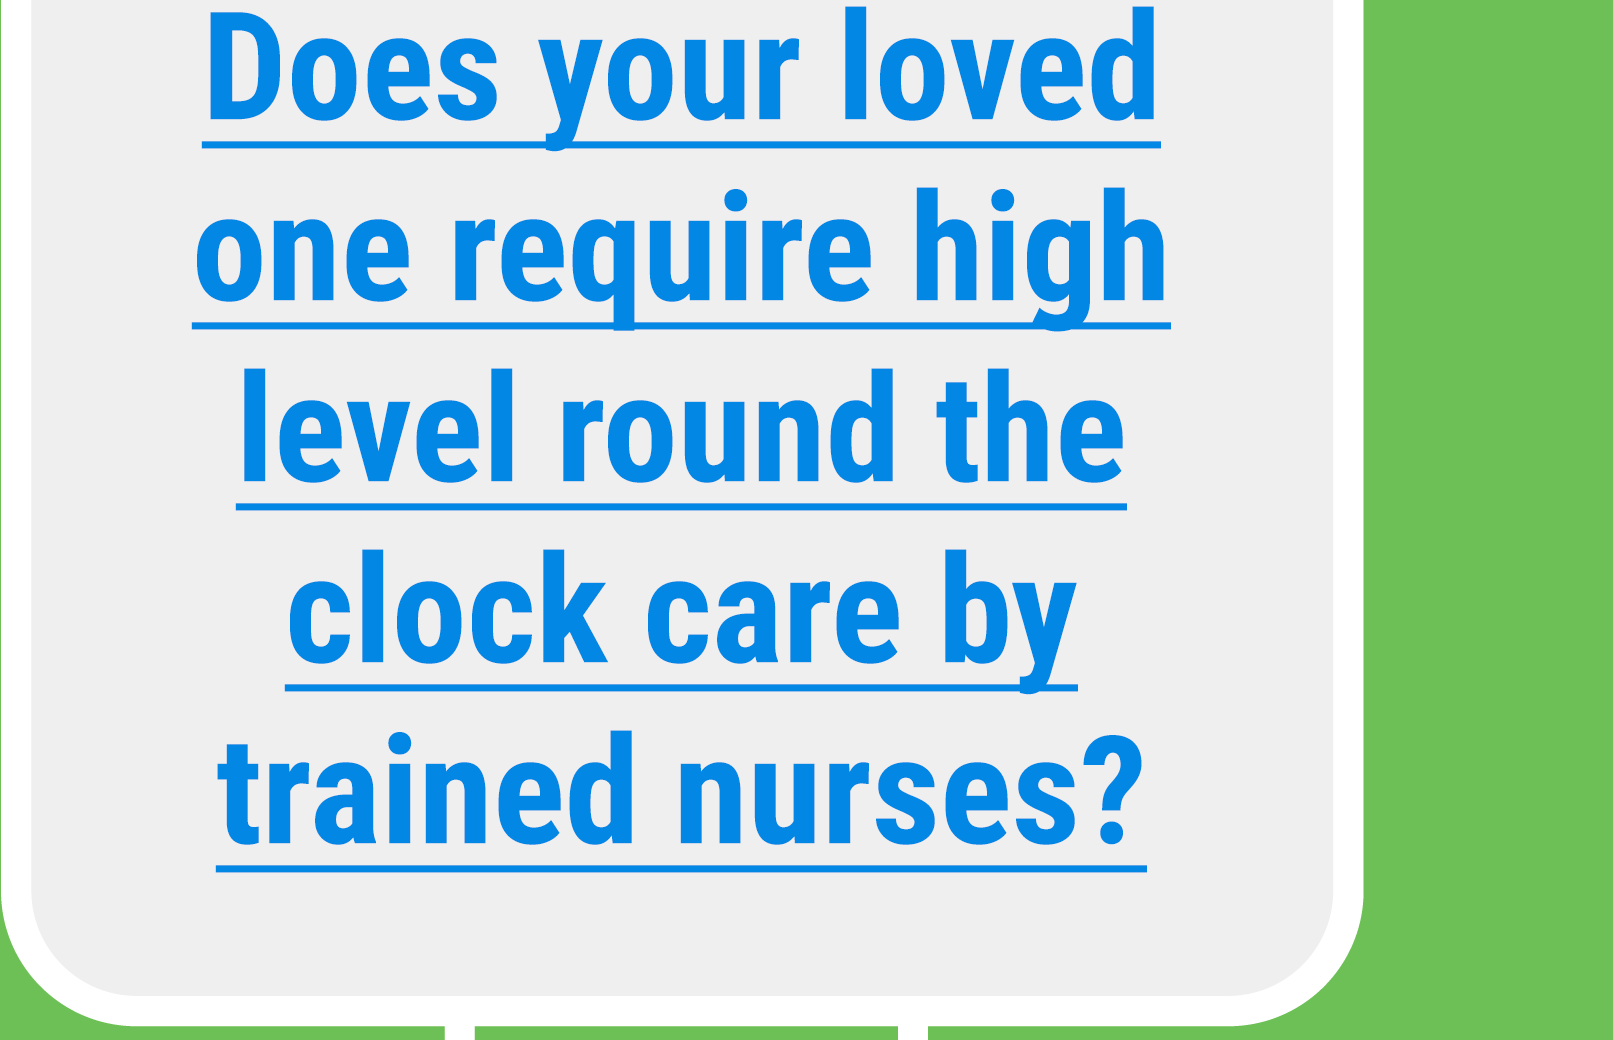 Does your loved one require high level round the clock care by trained nurses?